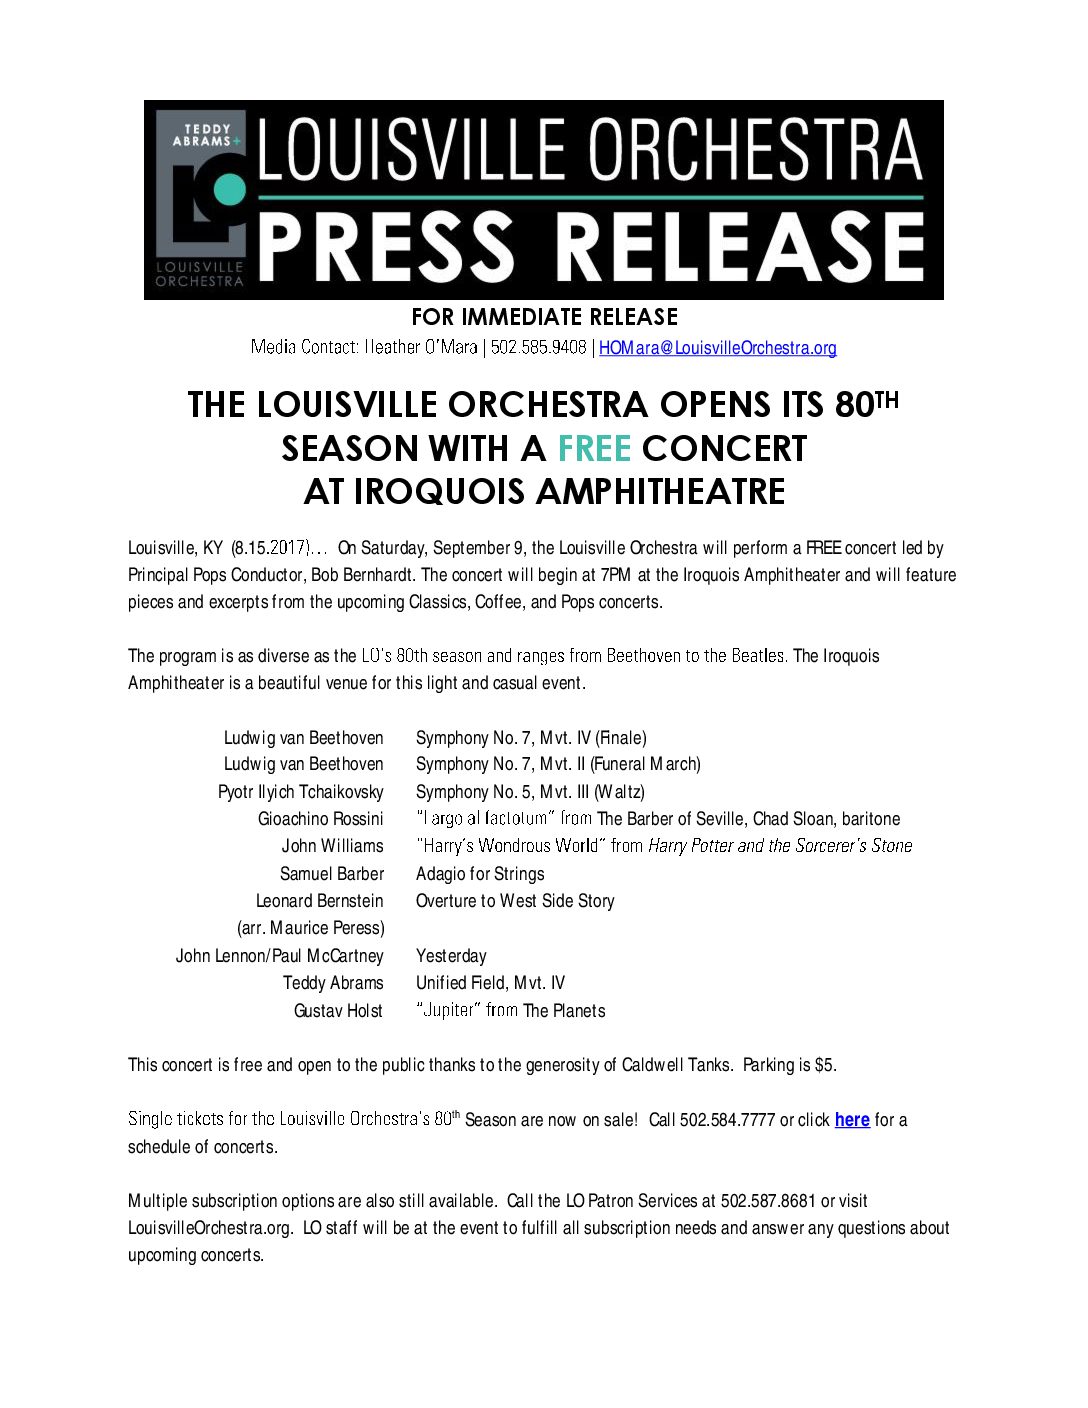 Free Preview Concert The Louisville Orchestra